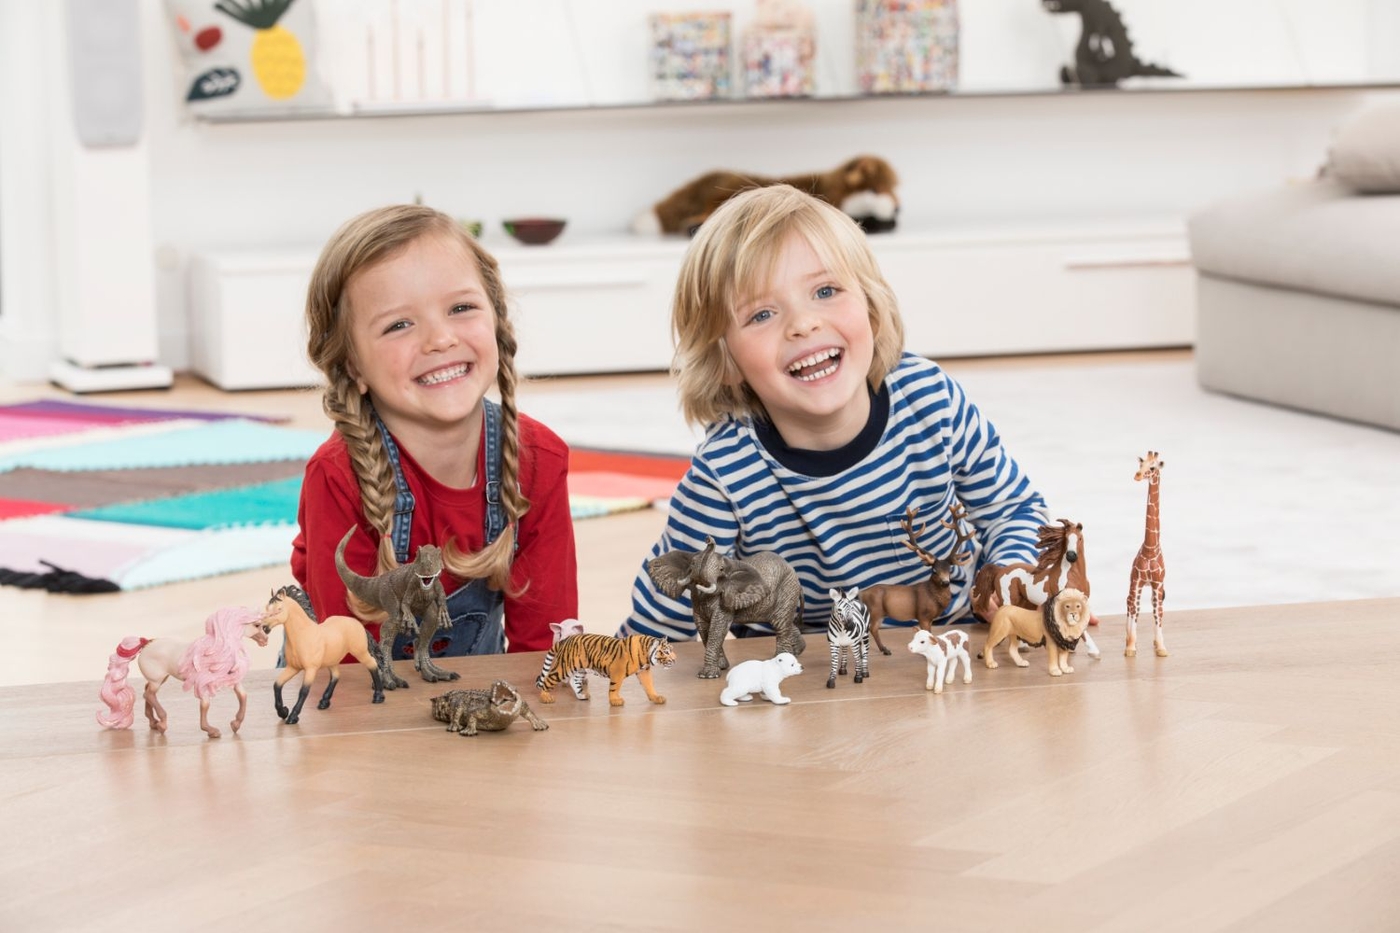 Schleich follows and analyzes its Amazon Business with Seelk Studio